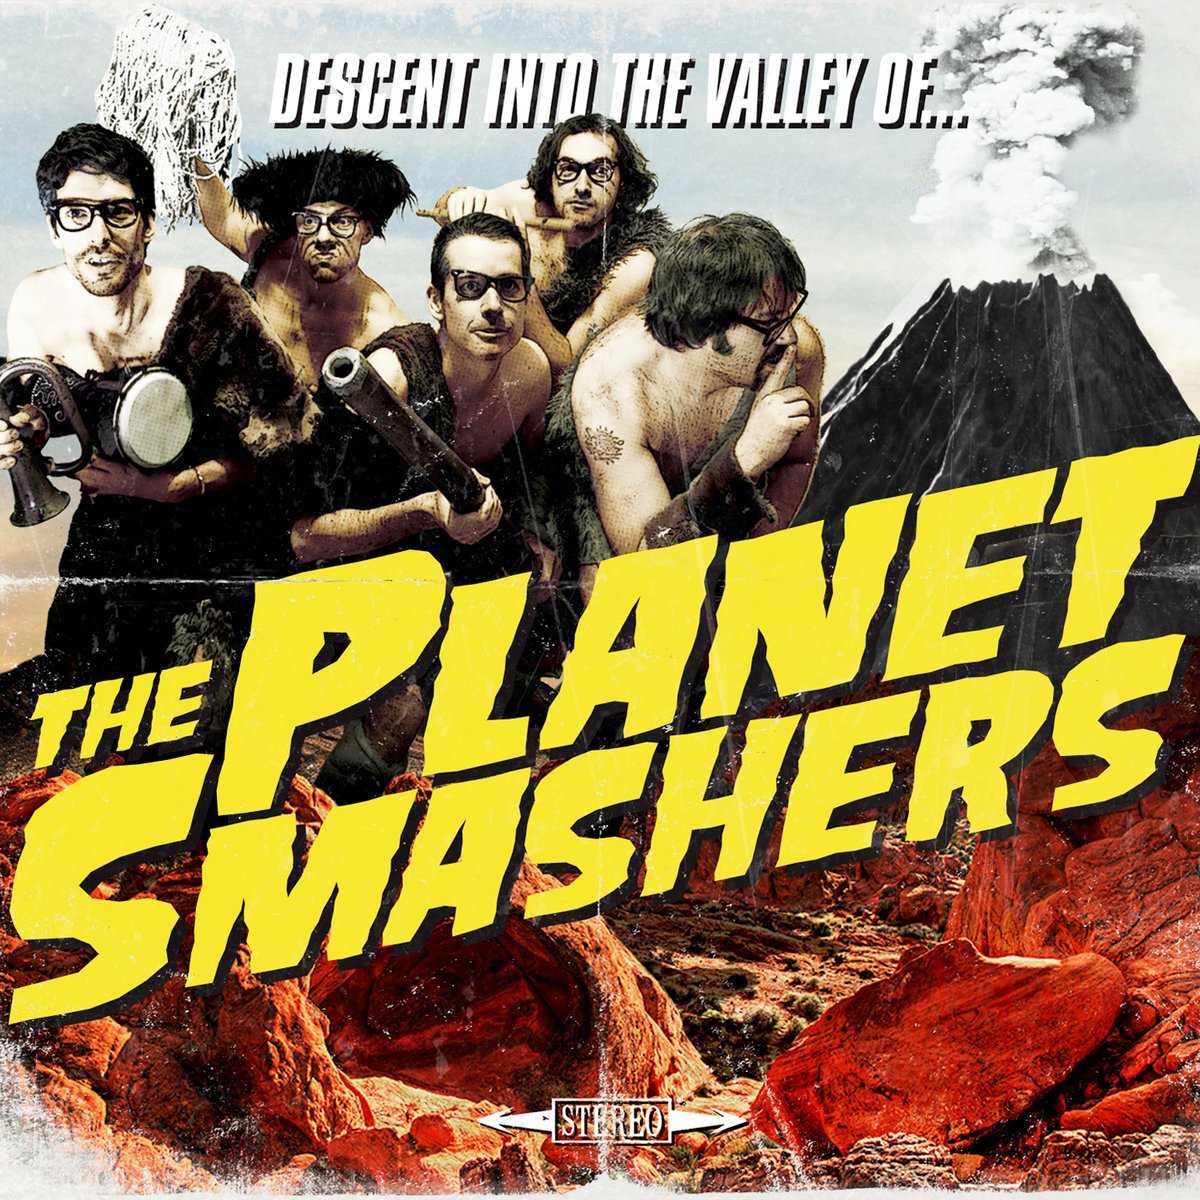 The Planet Smashers-Descent Into The Valley Of…-16BIT-WEB-FLAC-2011-VEXED